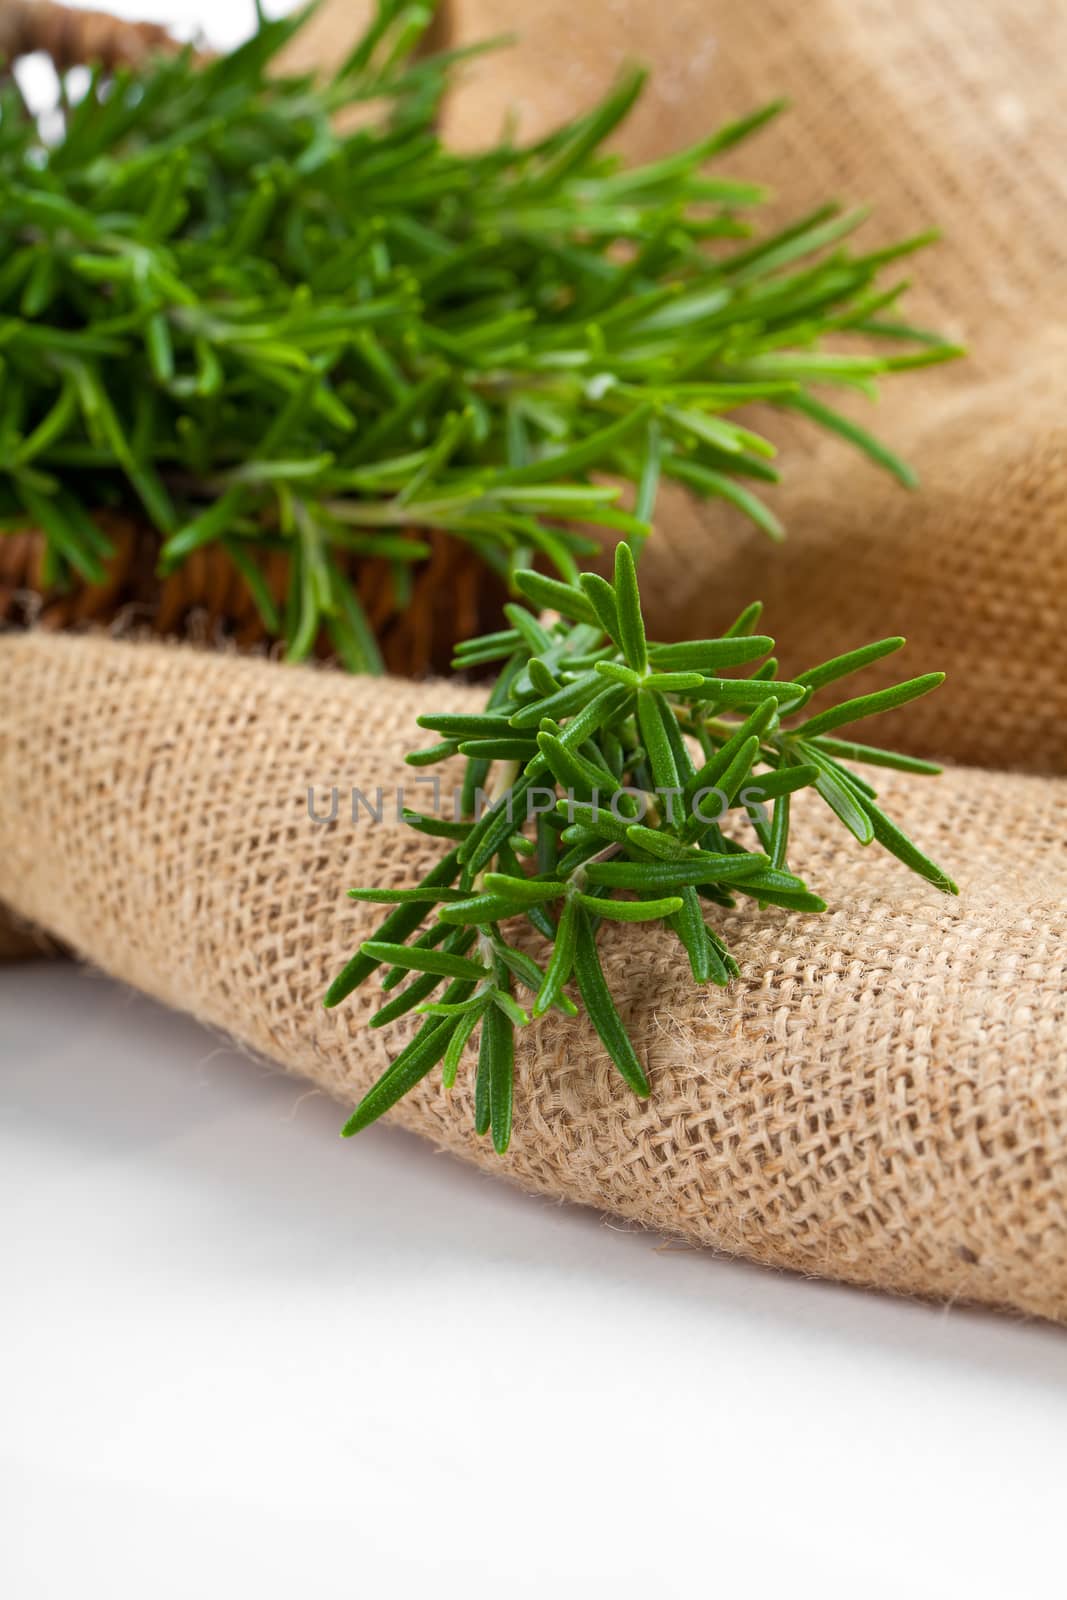 tied fresh rosemary on the burlap, over white background